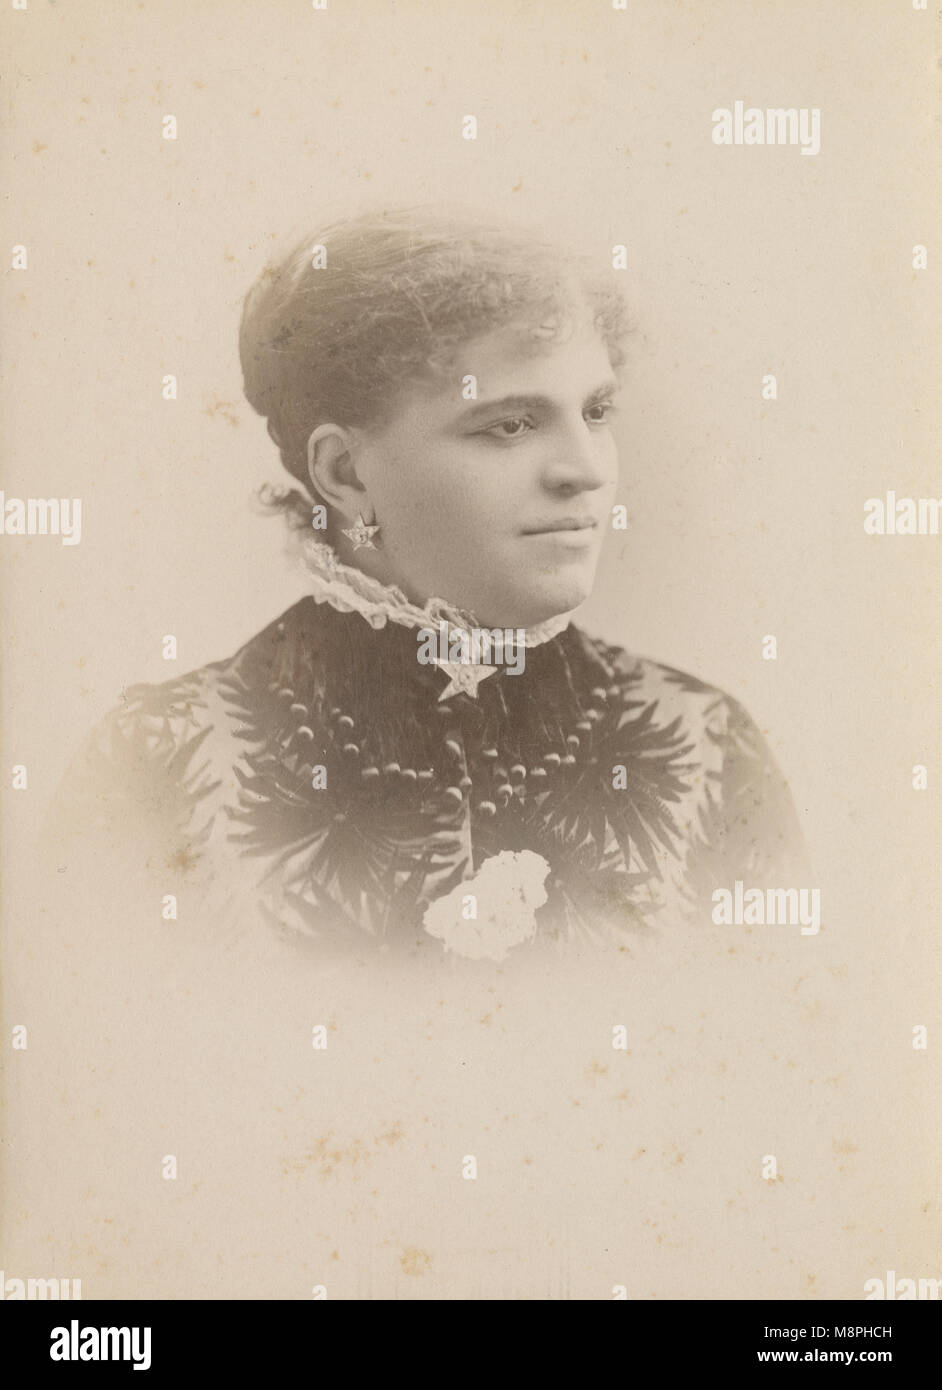 Antique c1860 photograph, Sofia Scalchi. Sofia Scalchi (1850-1922) was an Italian operatic contralto who could also sing in the mezzo-soprano range. Her career was international, and she appeared at leading theatres in both Europe and America. SOURCE: ORIGINAL CABINET CARD Stock Photo